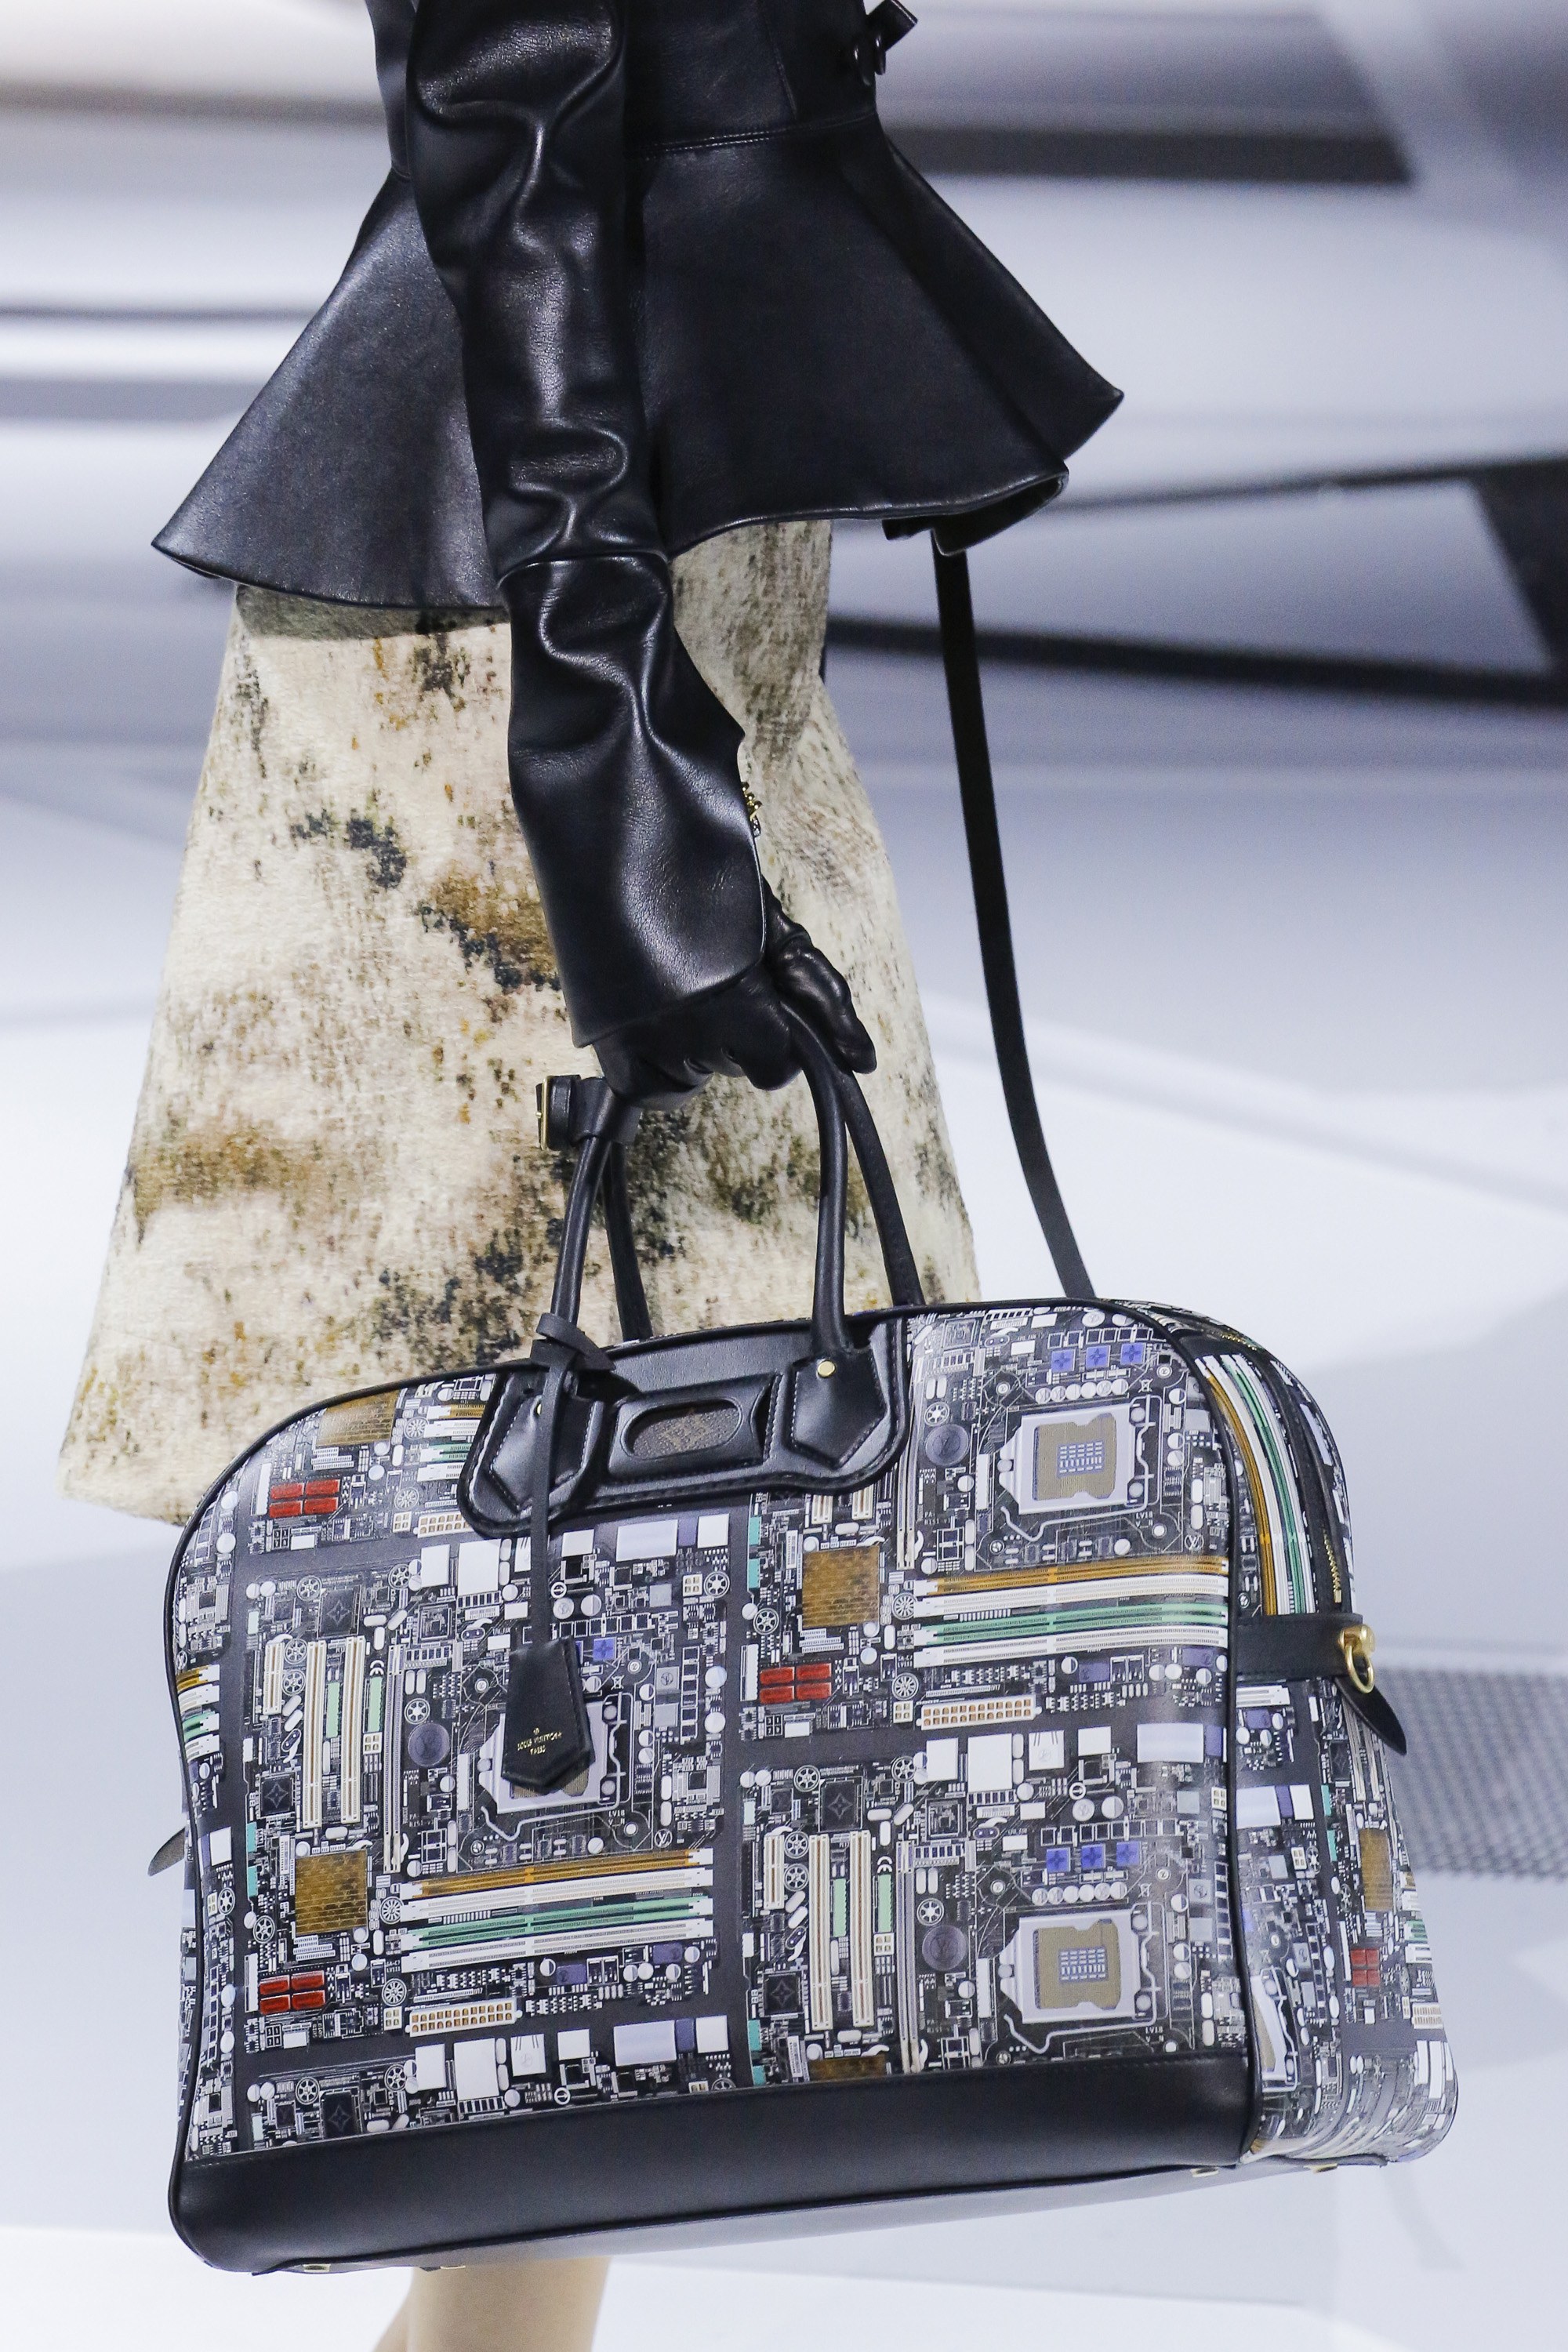 Louis Vuitton Multicolor Printed Calfskin Leather Motherboard